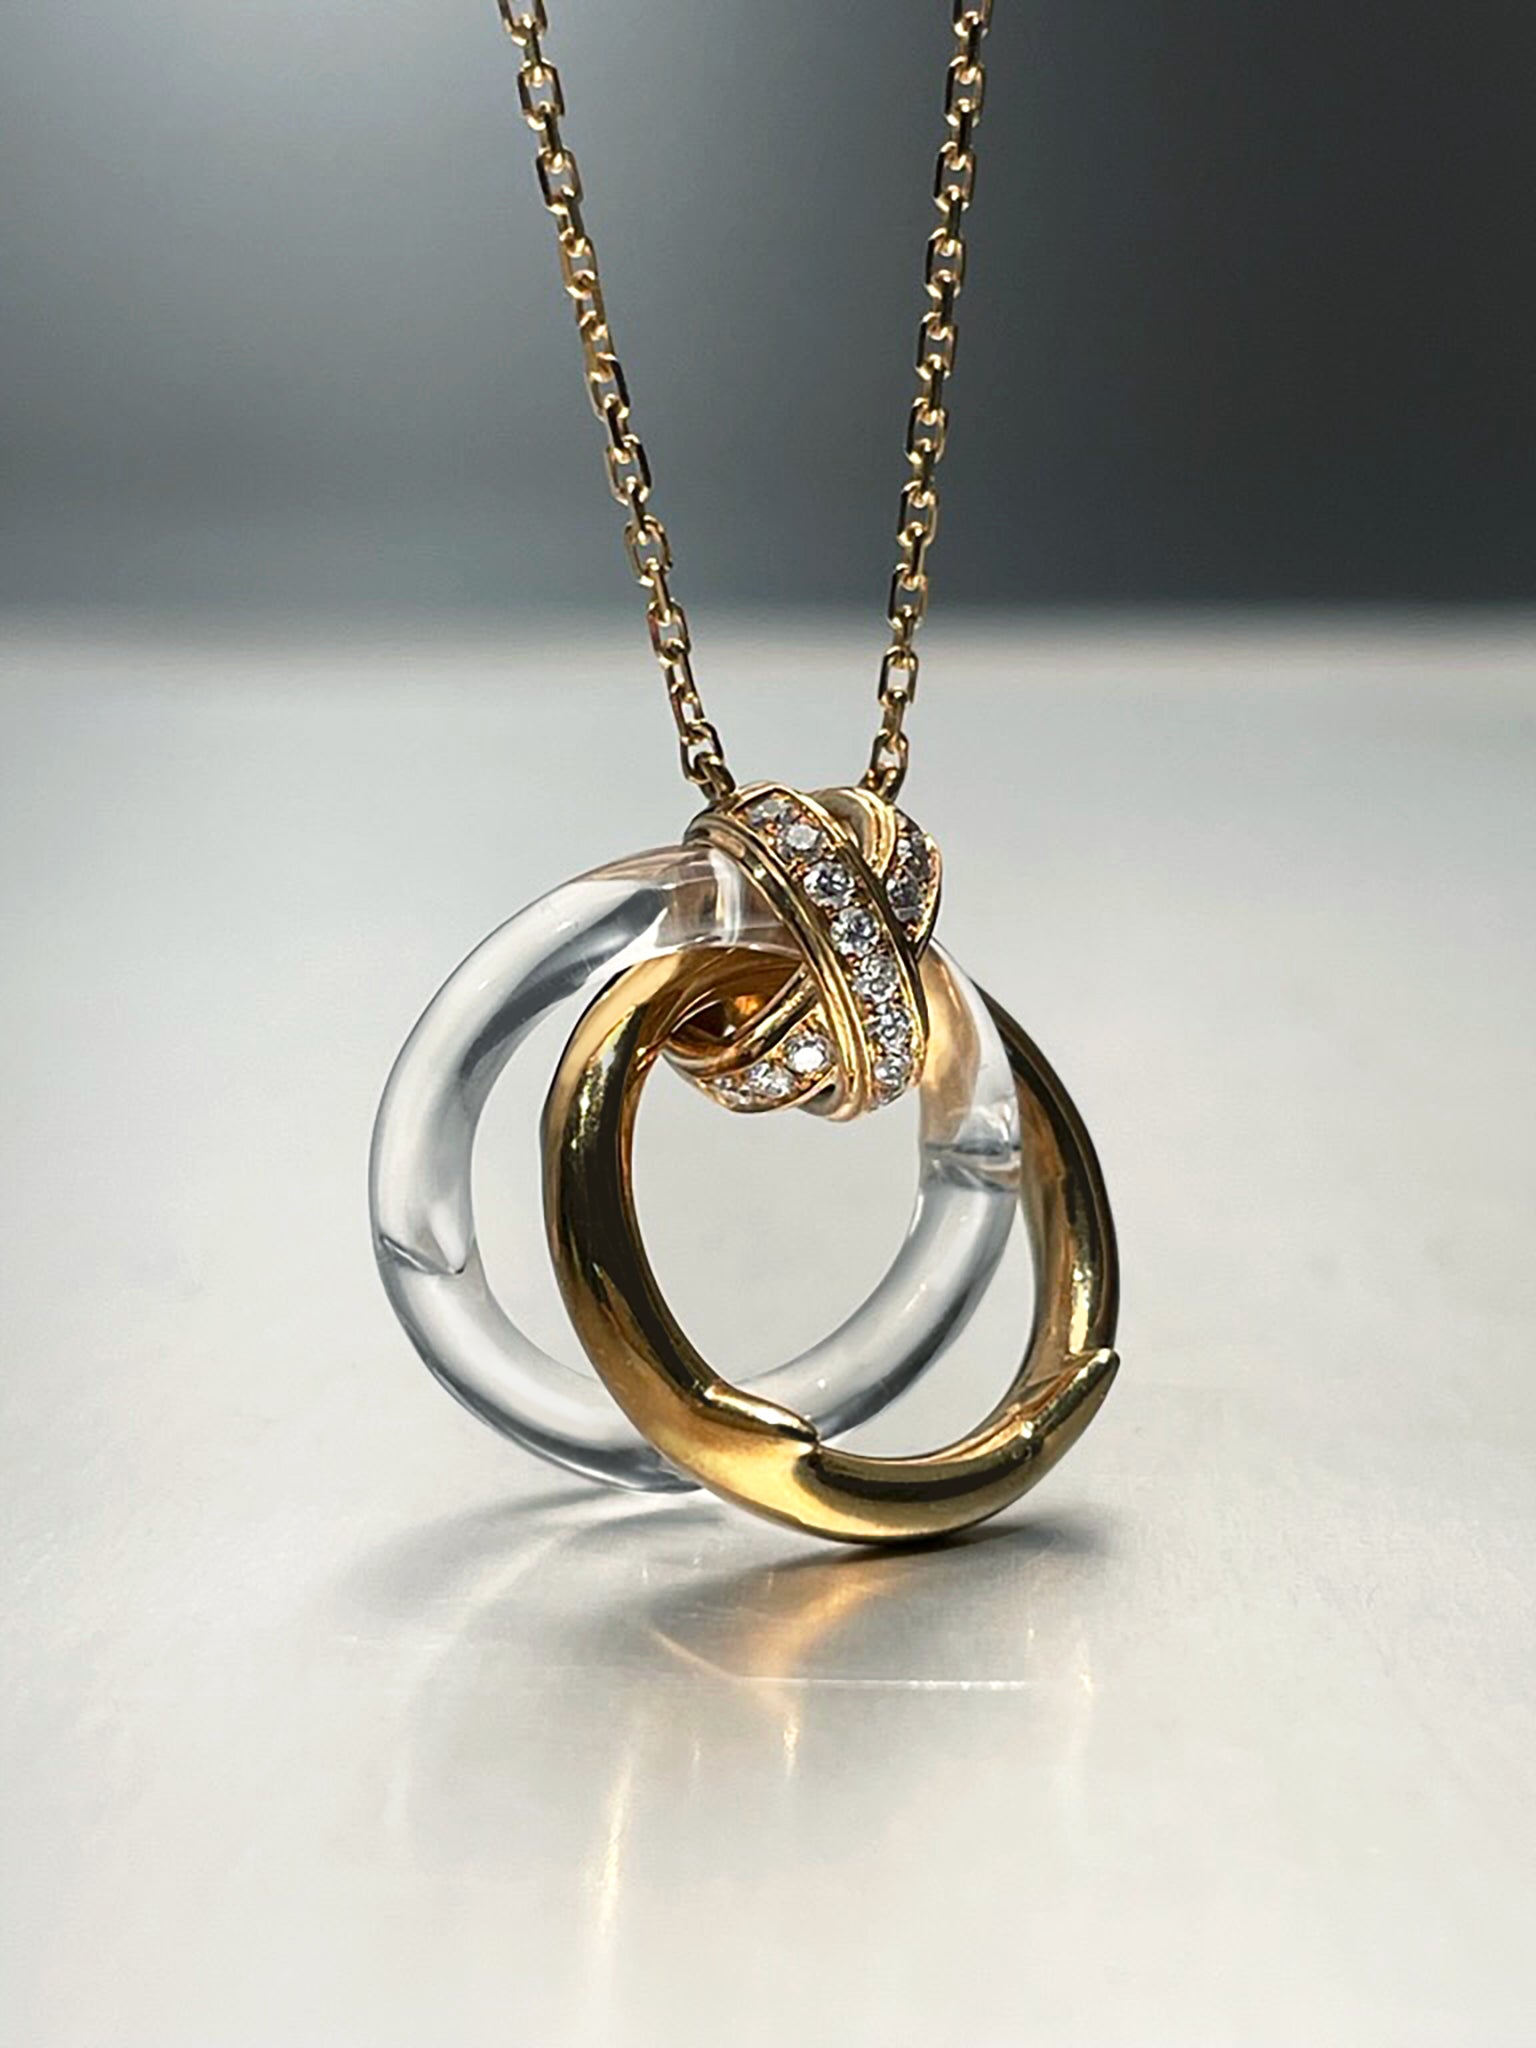 Ring of Thorns Cold Embrace Pendant